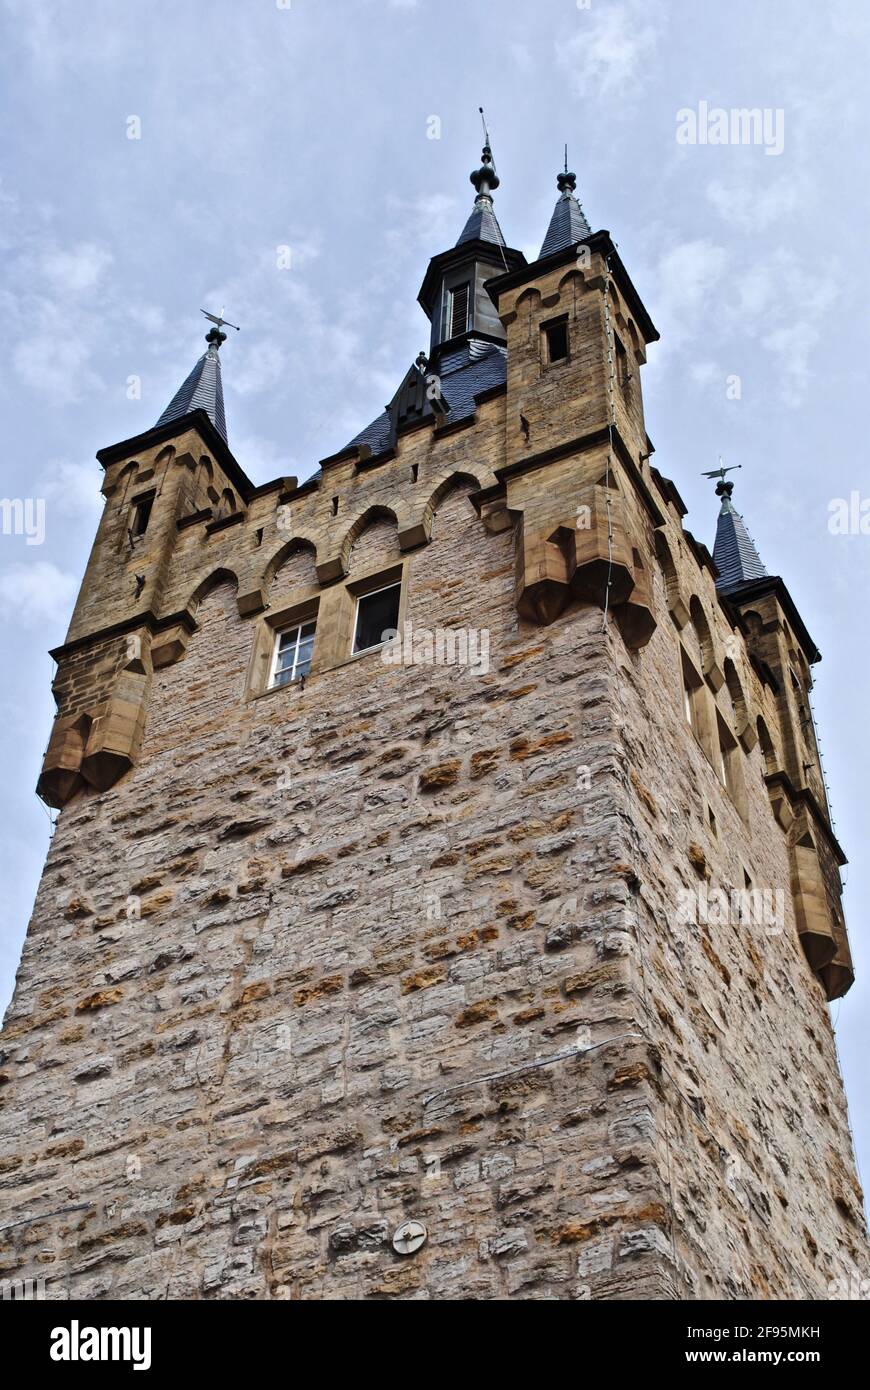 The Blue Tower (Blauer Turm) in Bad Wimpfen, Germany in the district of Heilbronn in the Baden-Württemberg. The town's principal visual landmark. Stock Photo